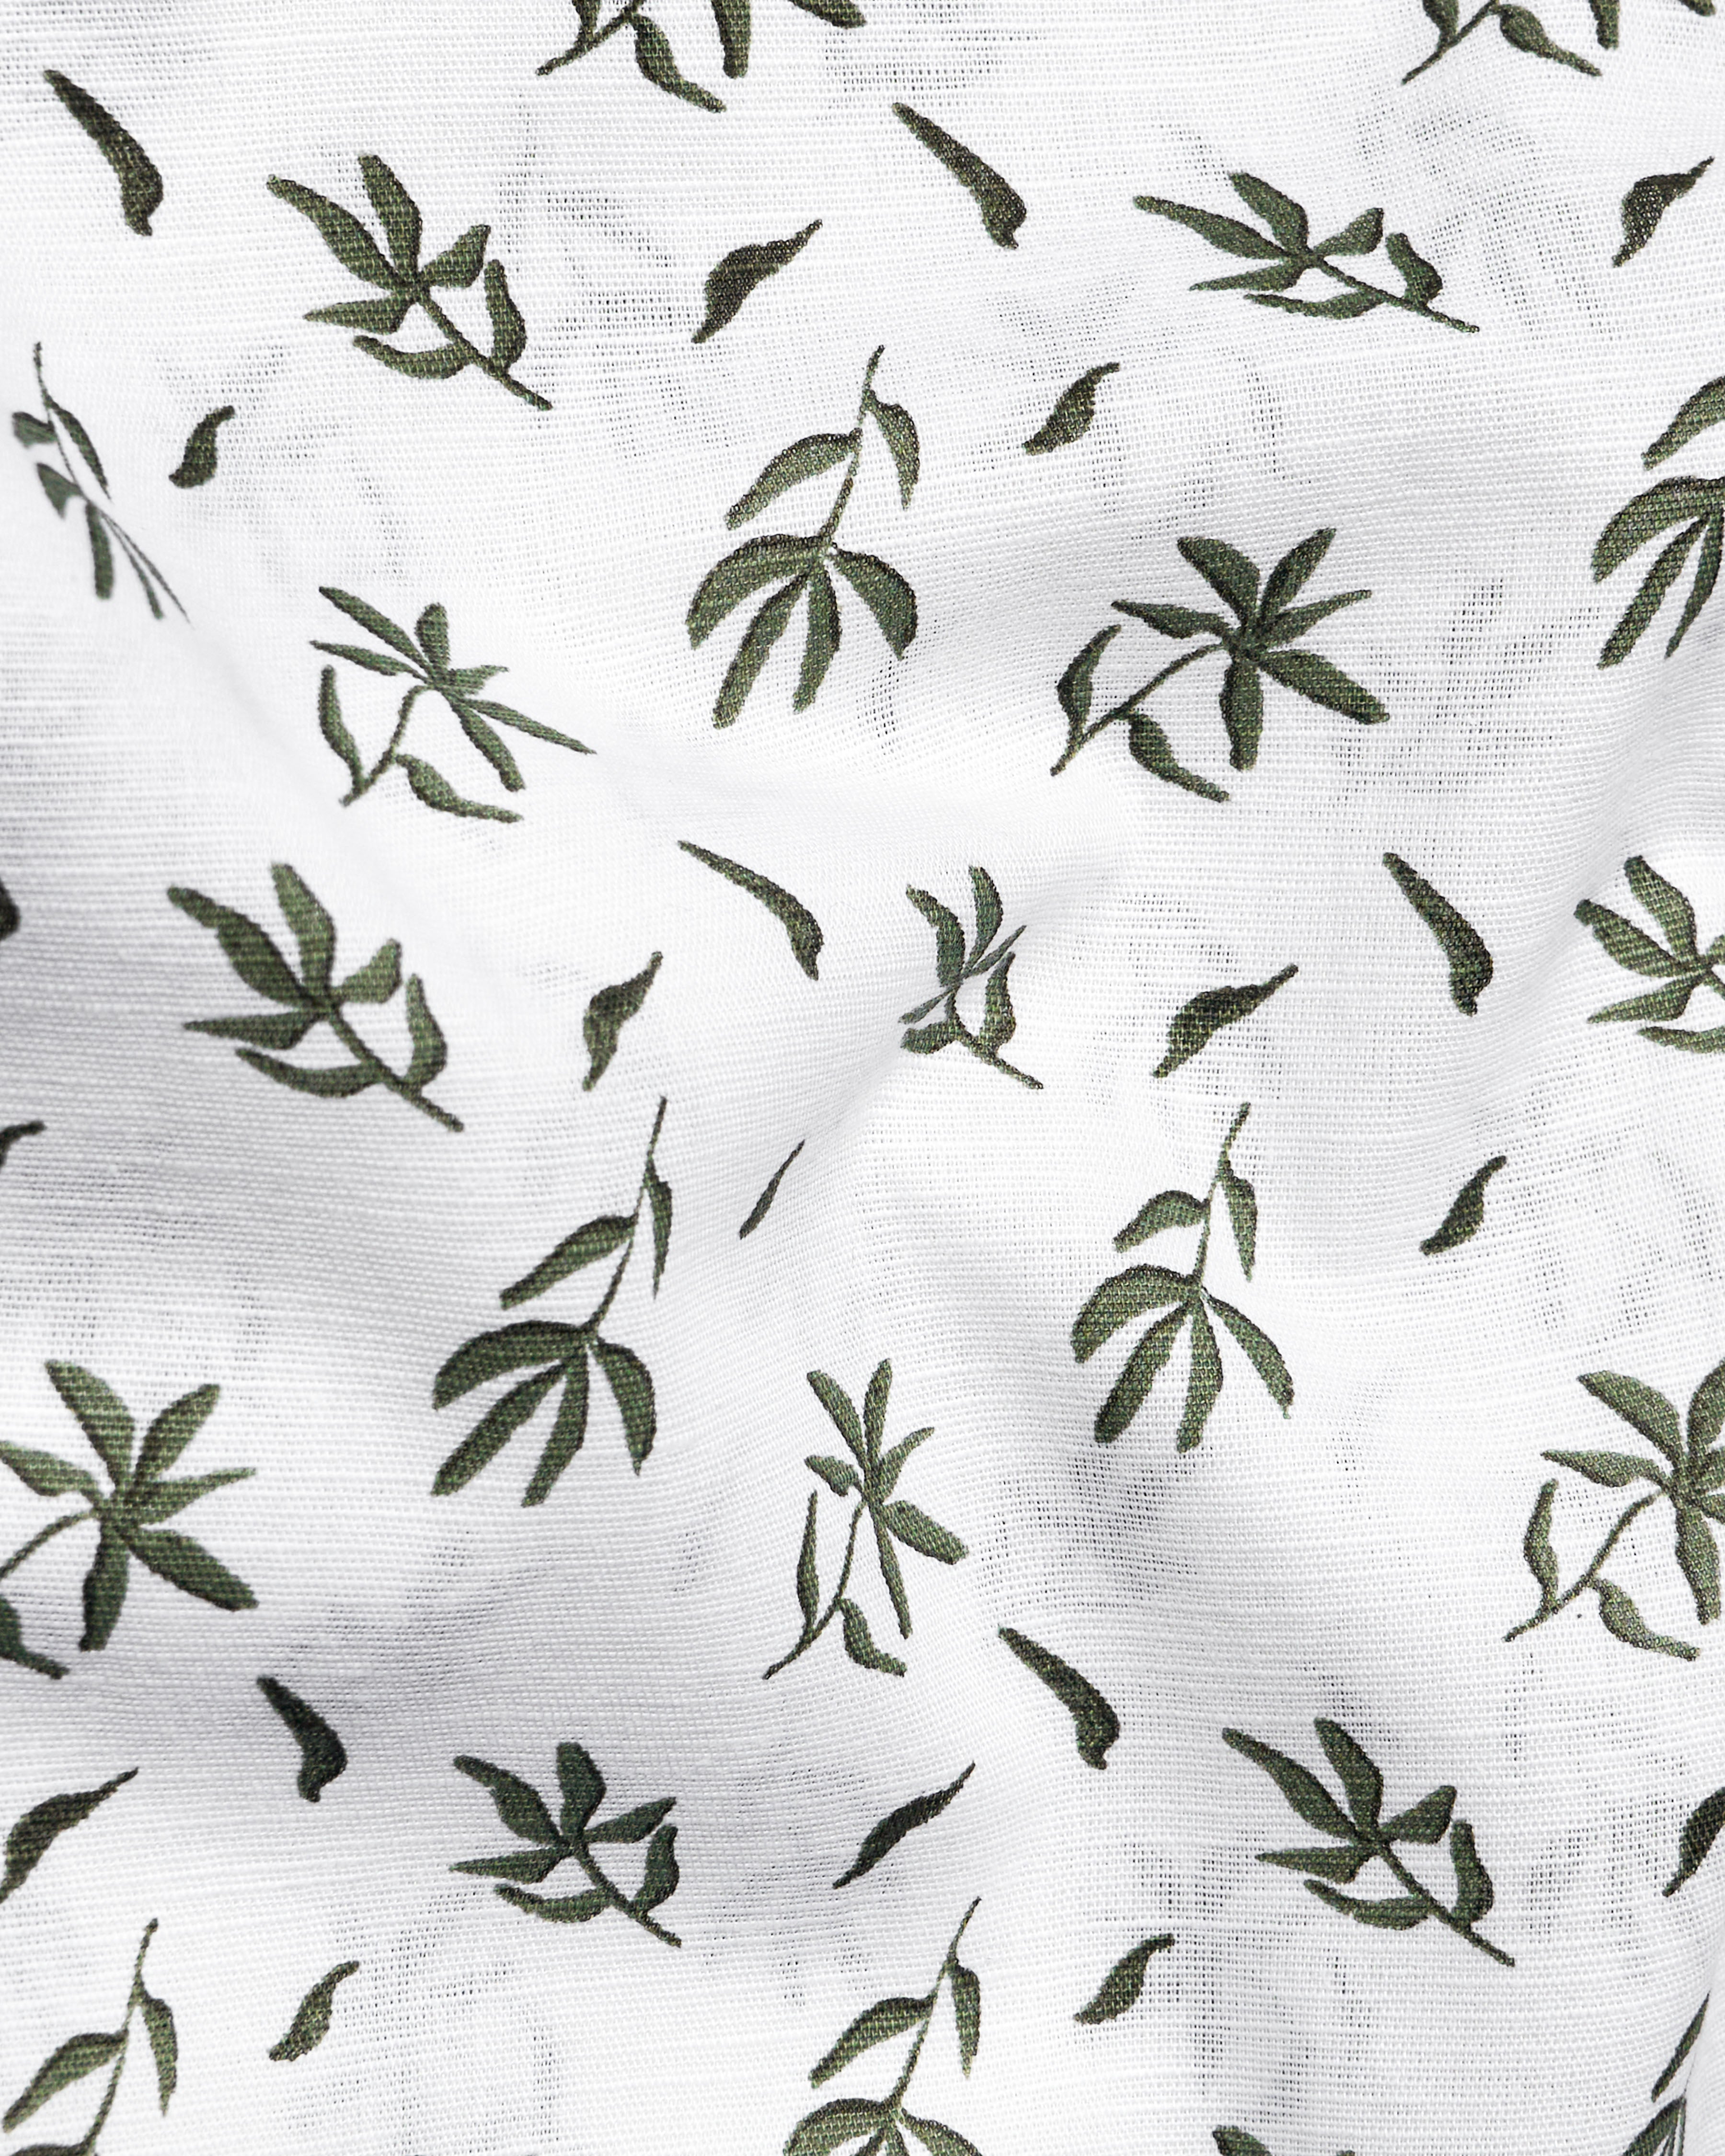 Bright White with Leaves Printed Luxurious Linen Shirt  8738-GR-38,8738-GR-H-38,8738-GR-39,8738-GR-H-39,8738-GR-40,8738-GR-H-40,8738-GR-42,8738-GR-H-42,8738-GR-44,8738-GR-H-44,8738-GR-46,8738-GR-H-46,8738-GR-48,8738-GR-H-48,8738-GR-50,8738-GR-H-50,8738-GR-52,8738-GR-H-52